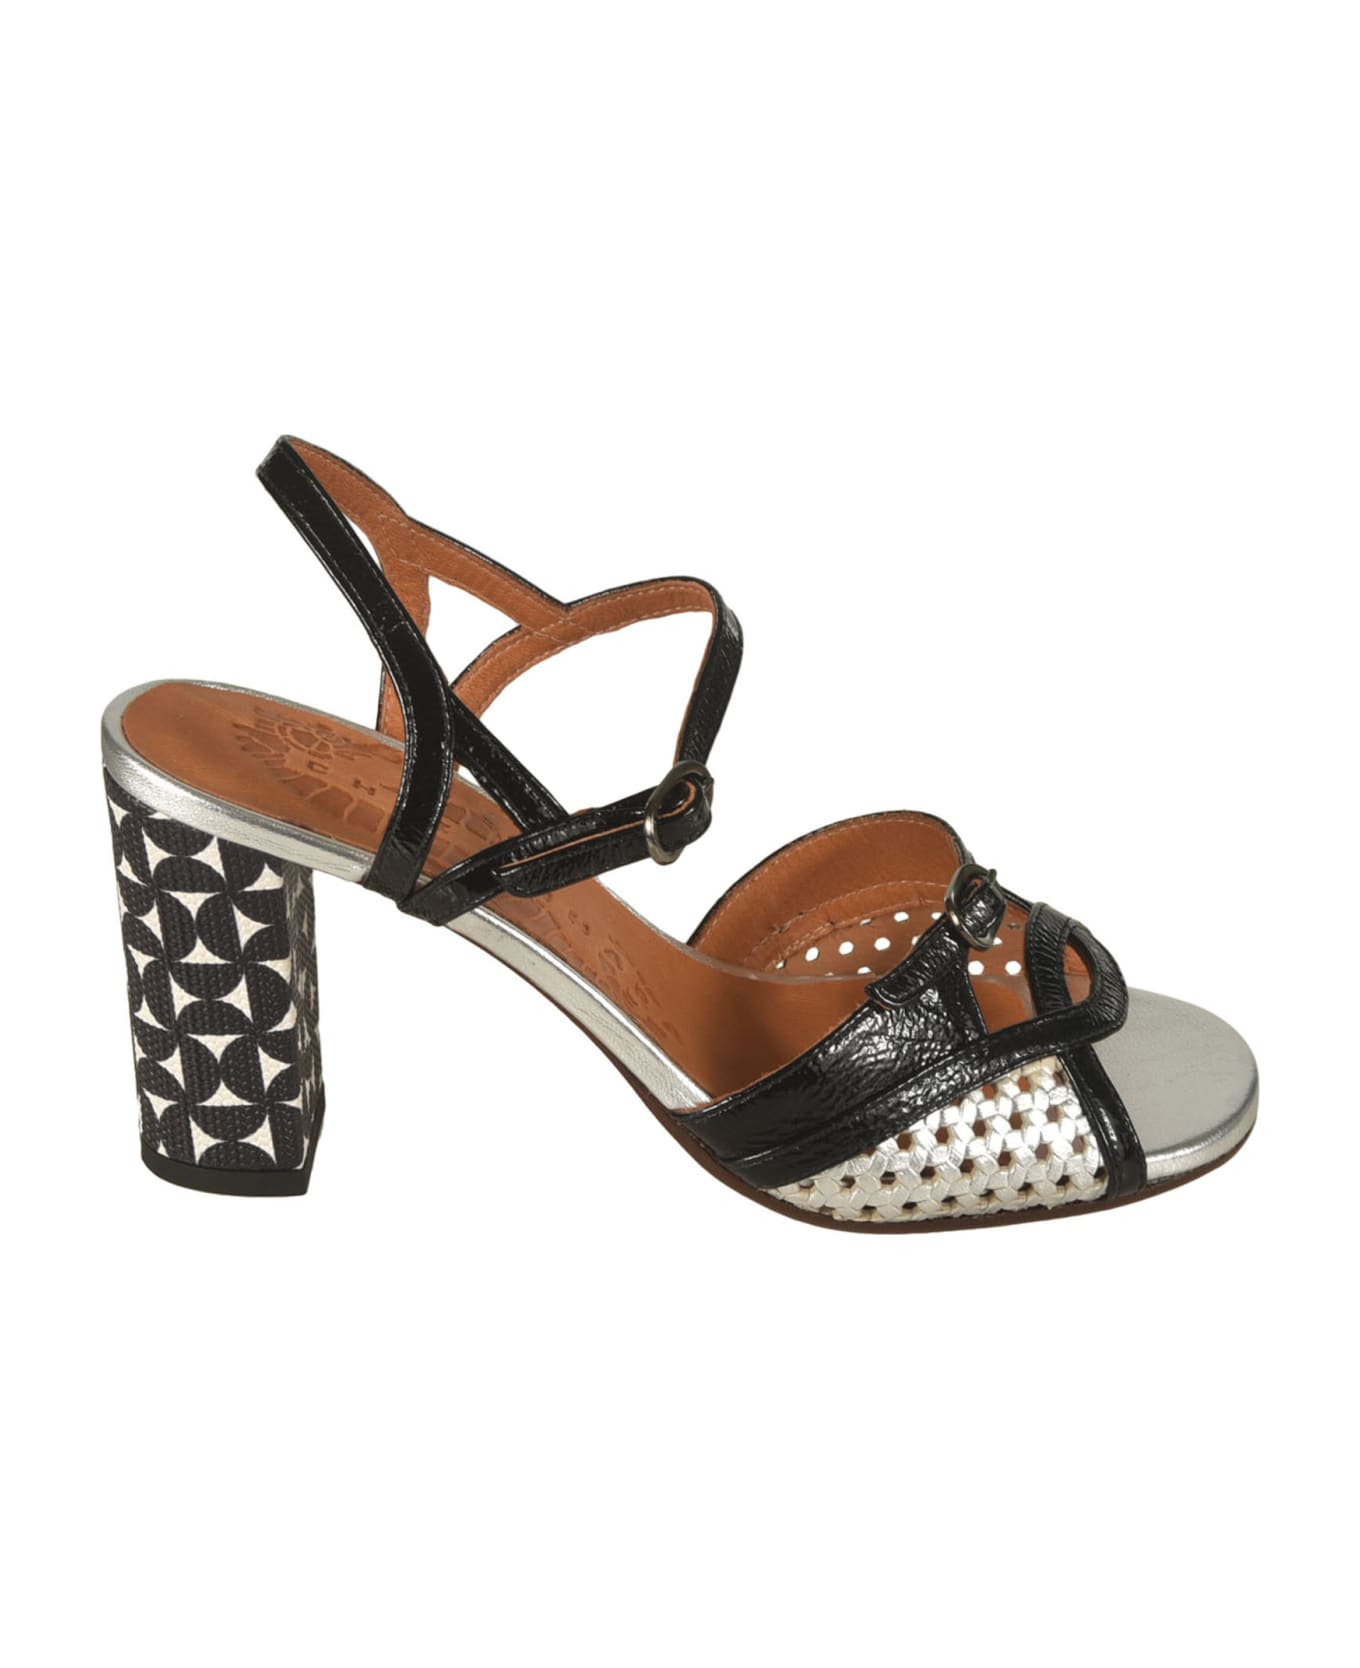 Chie Mihara Ankle Strap Sandals - Black